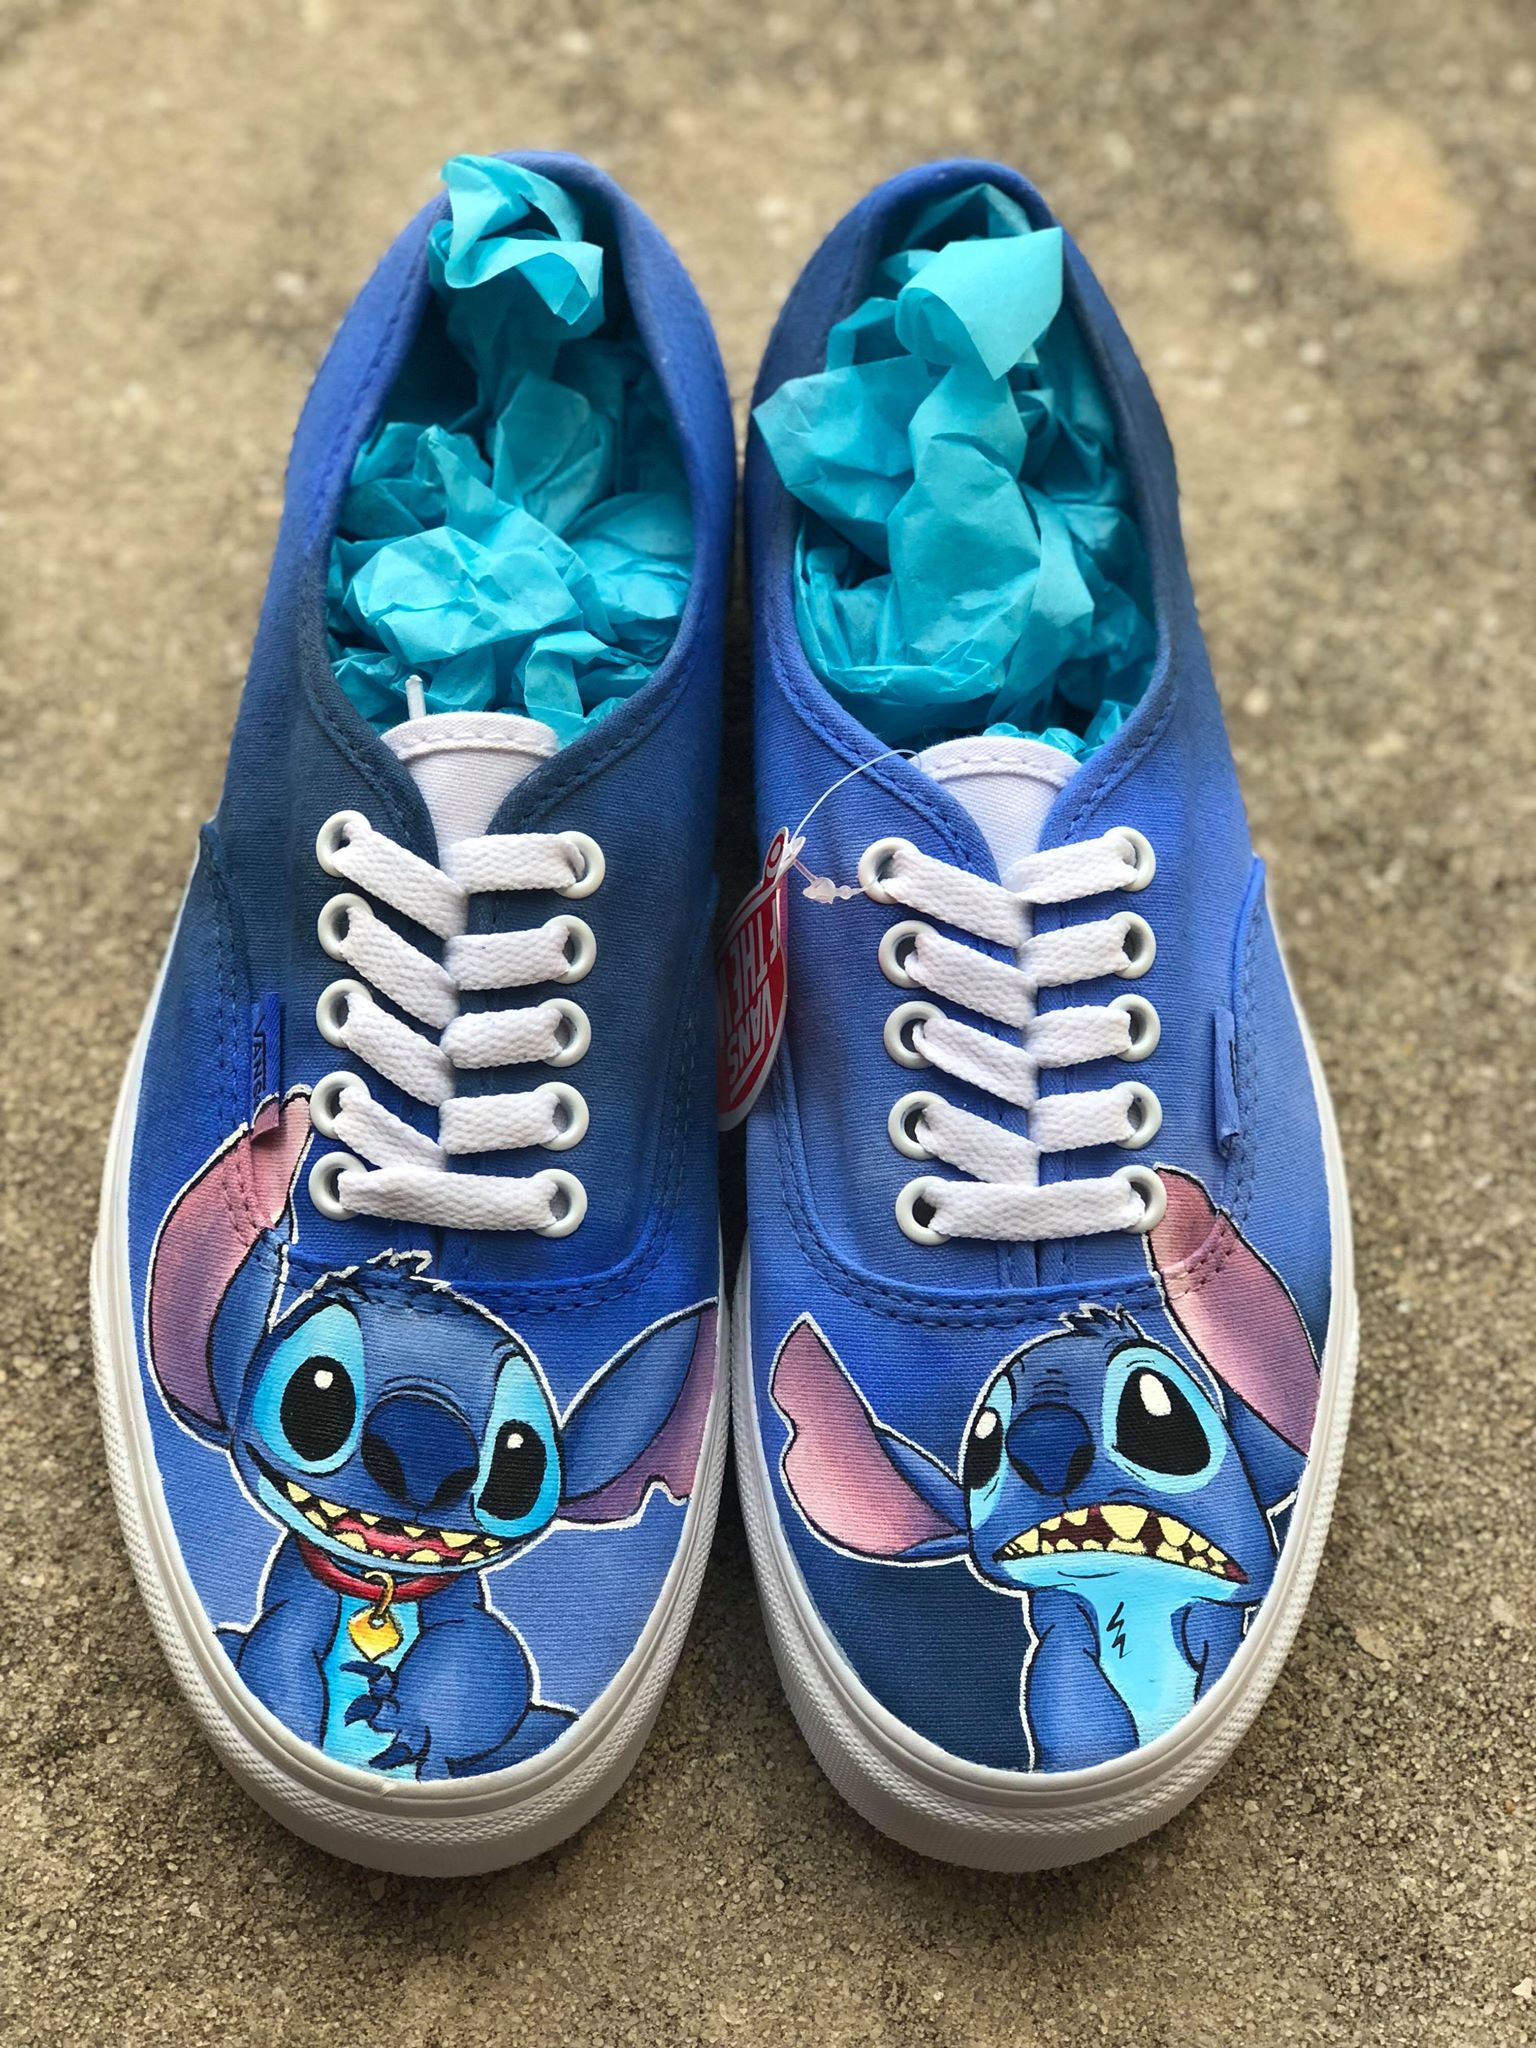 A NEW Disney Stitch Vans Collection Is Online Now! 